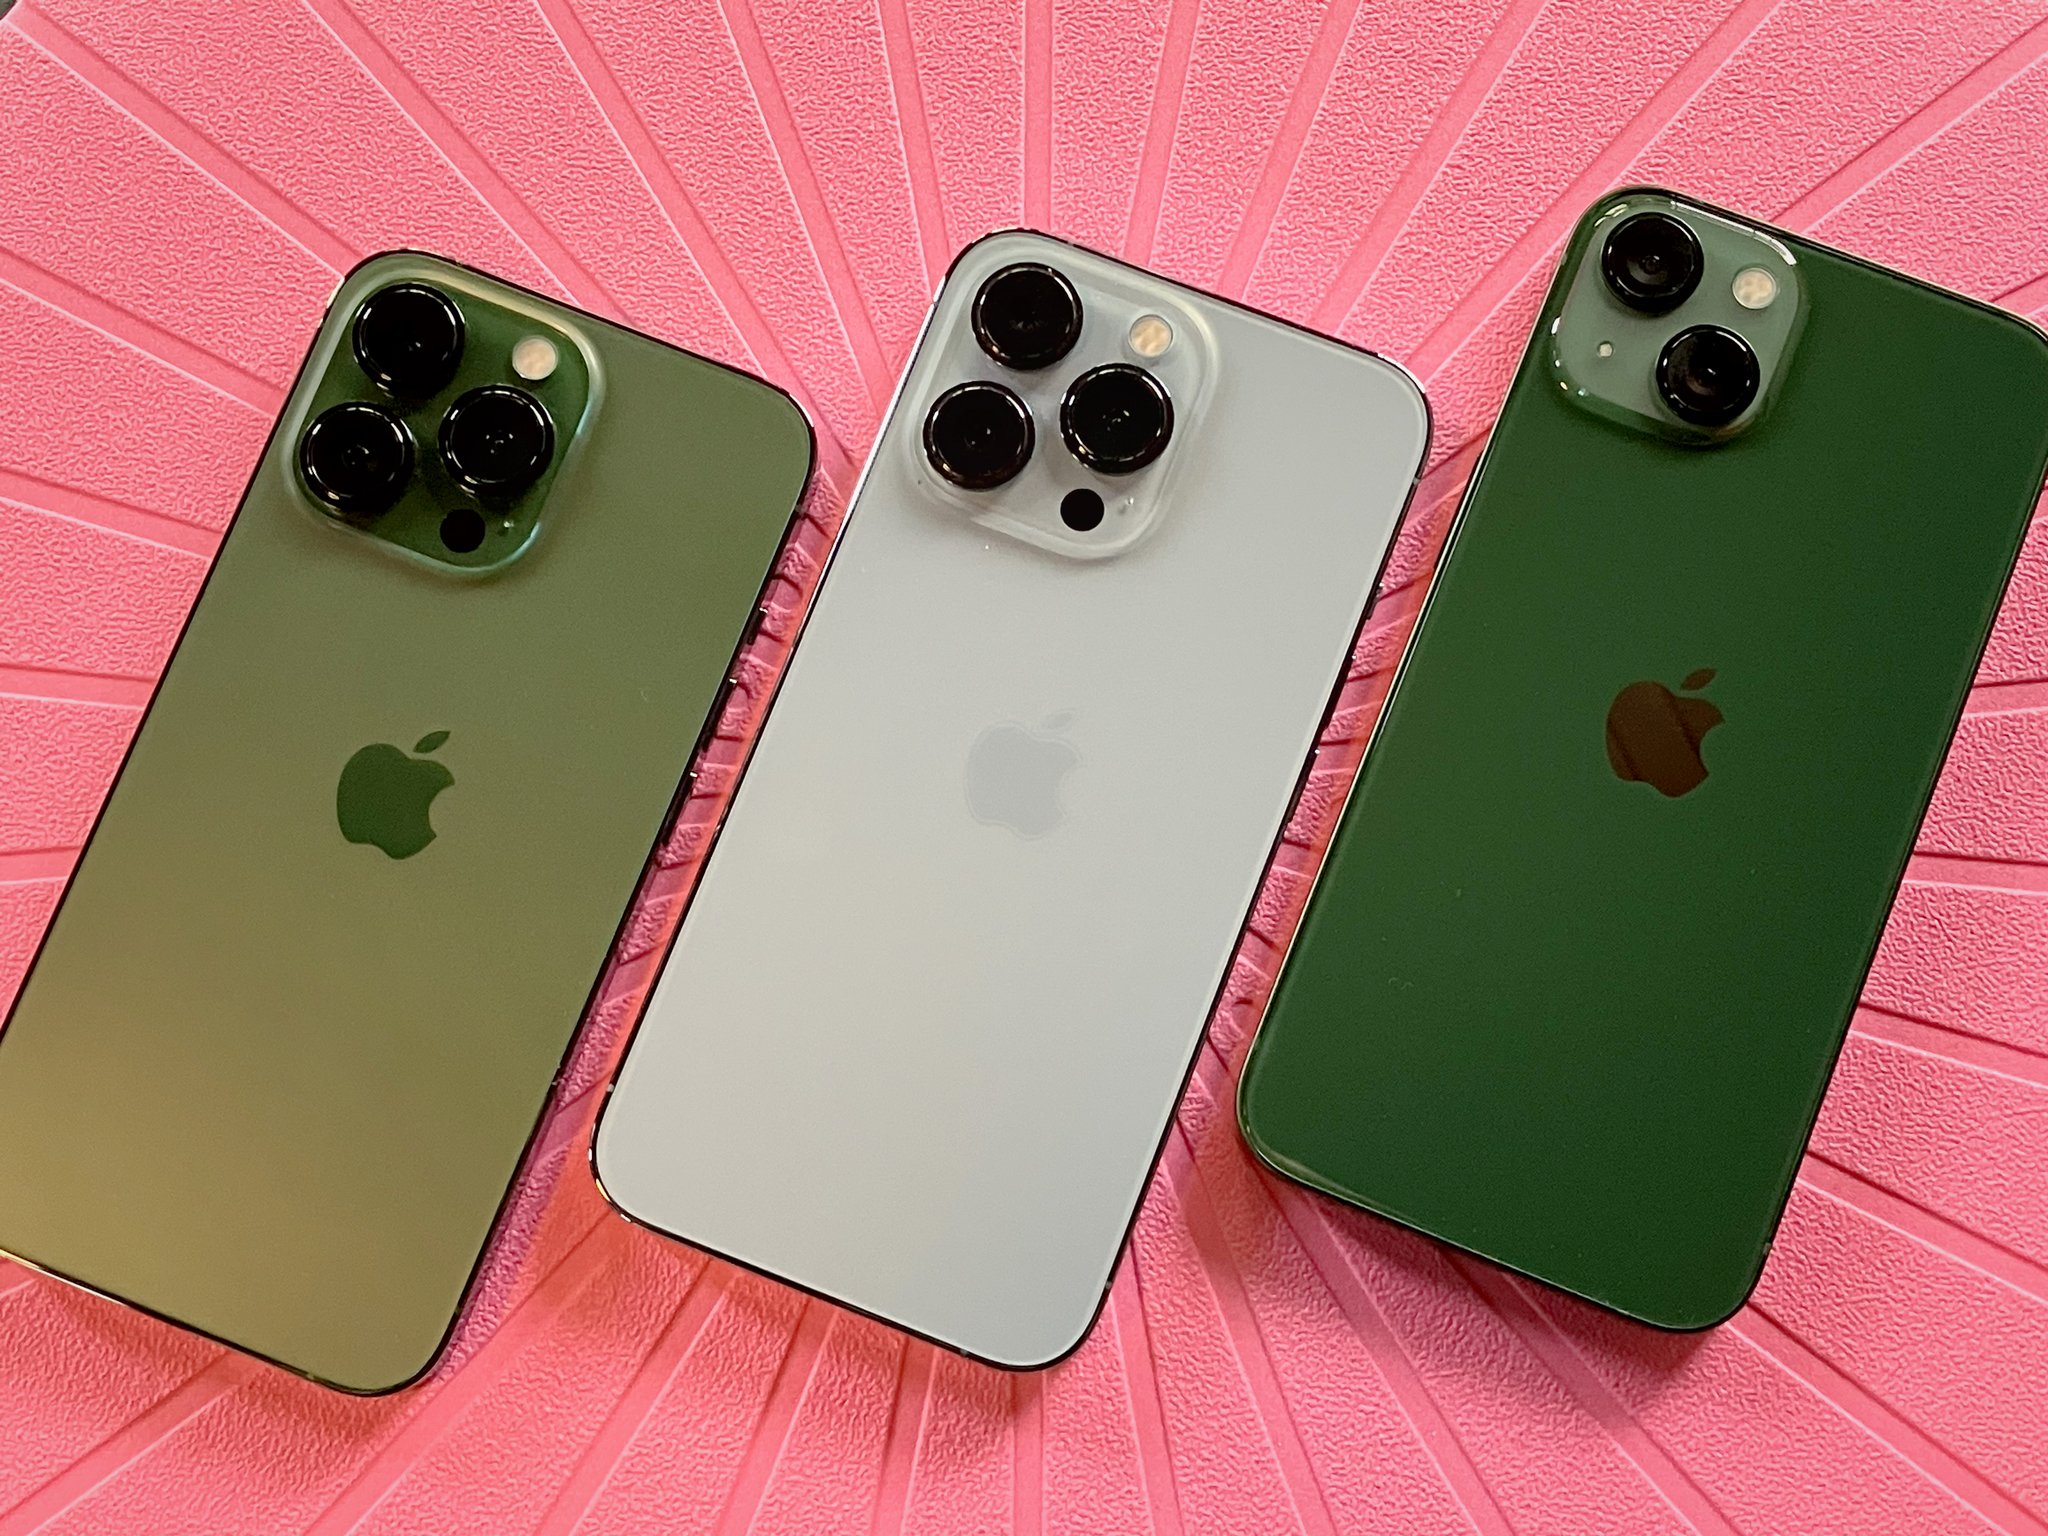 Green iPhone 13 and Alpine Green iPhone 13 Pro compared with Sierra Blue